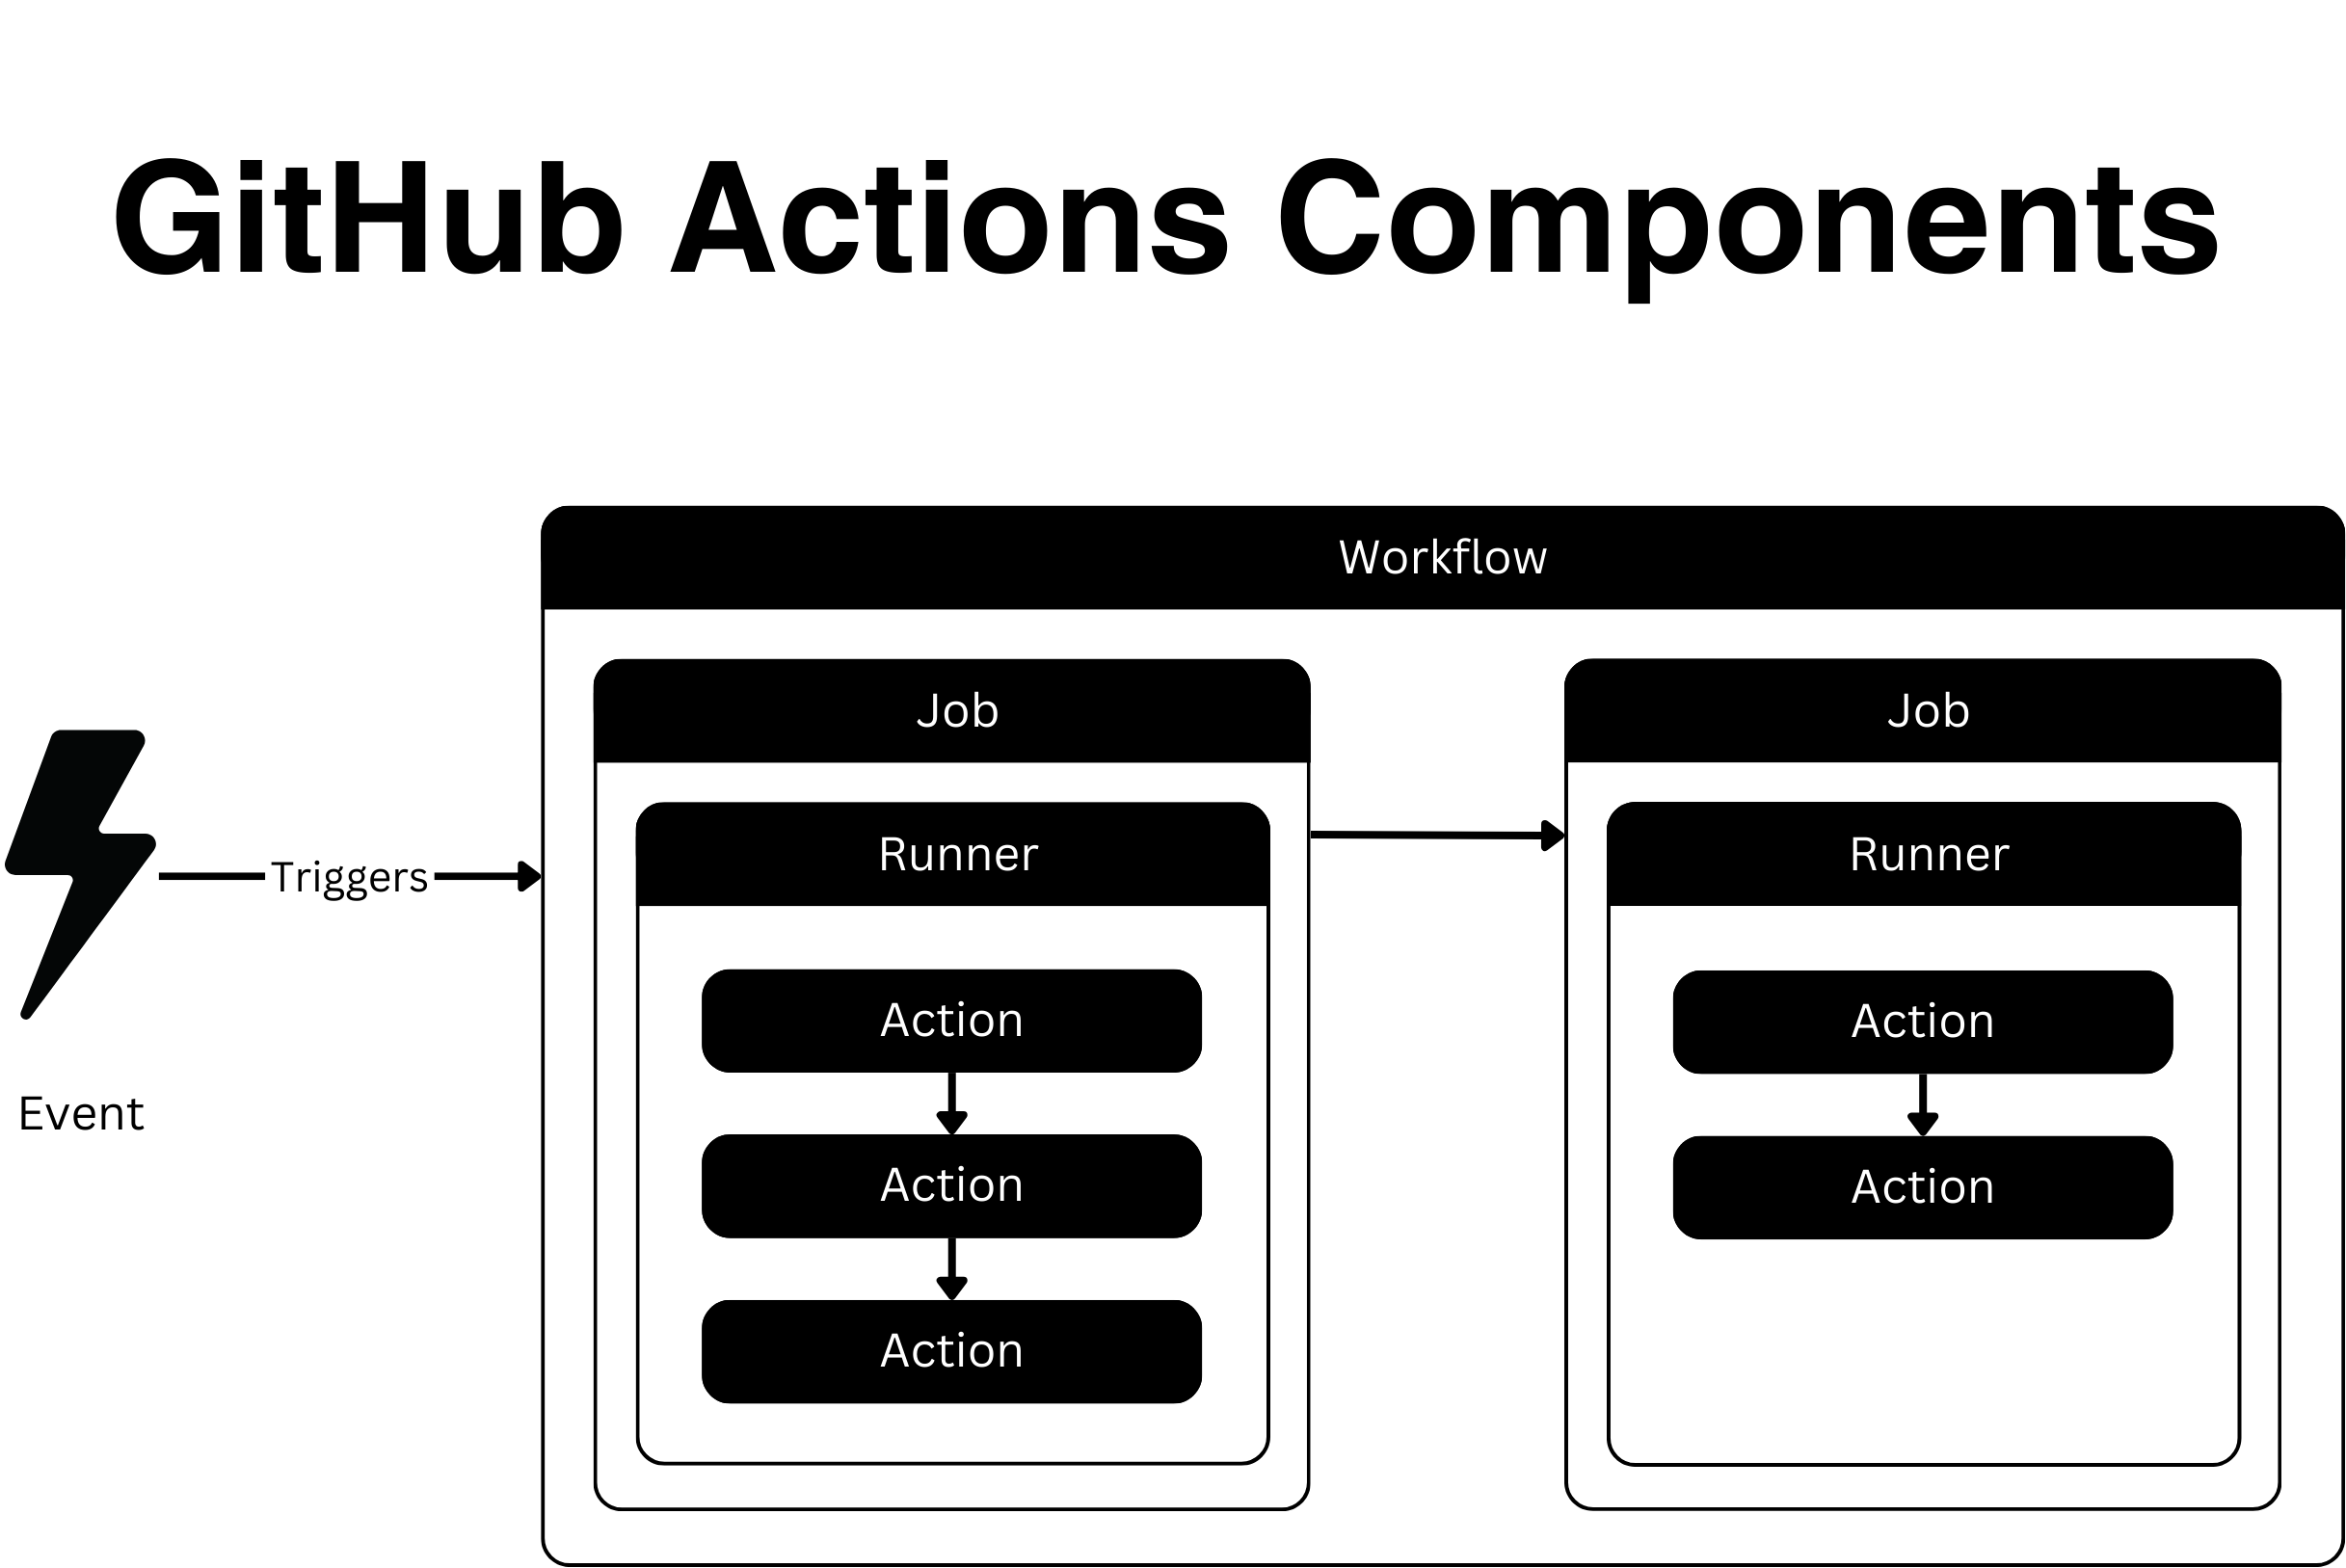 Diagram illustrating the five core components of GitHub Actions